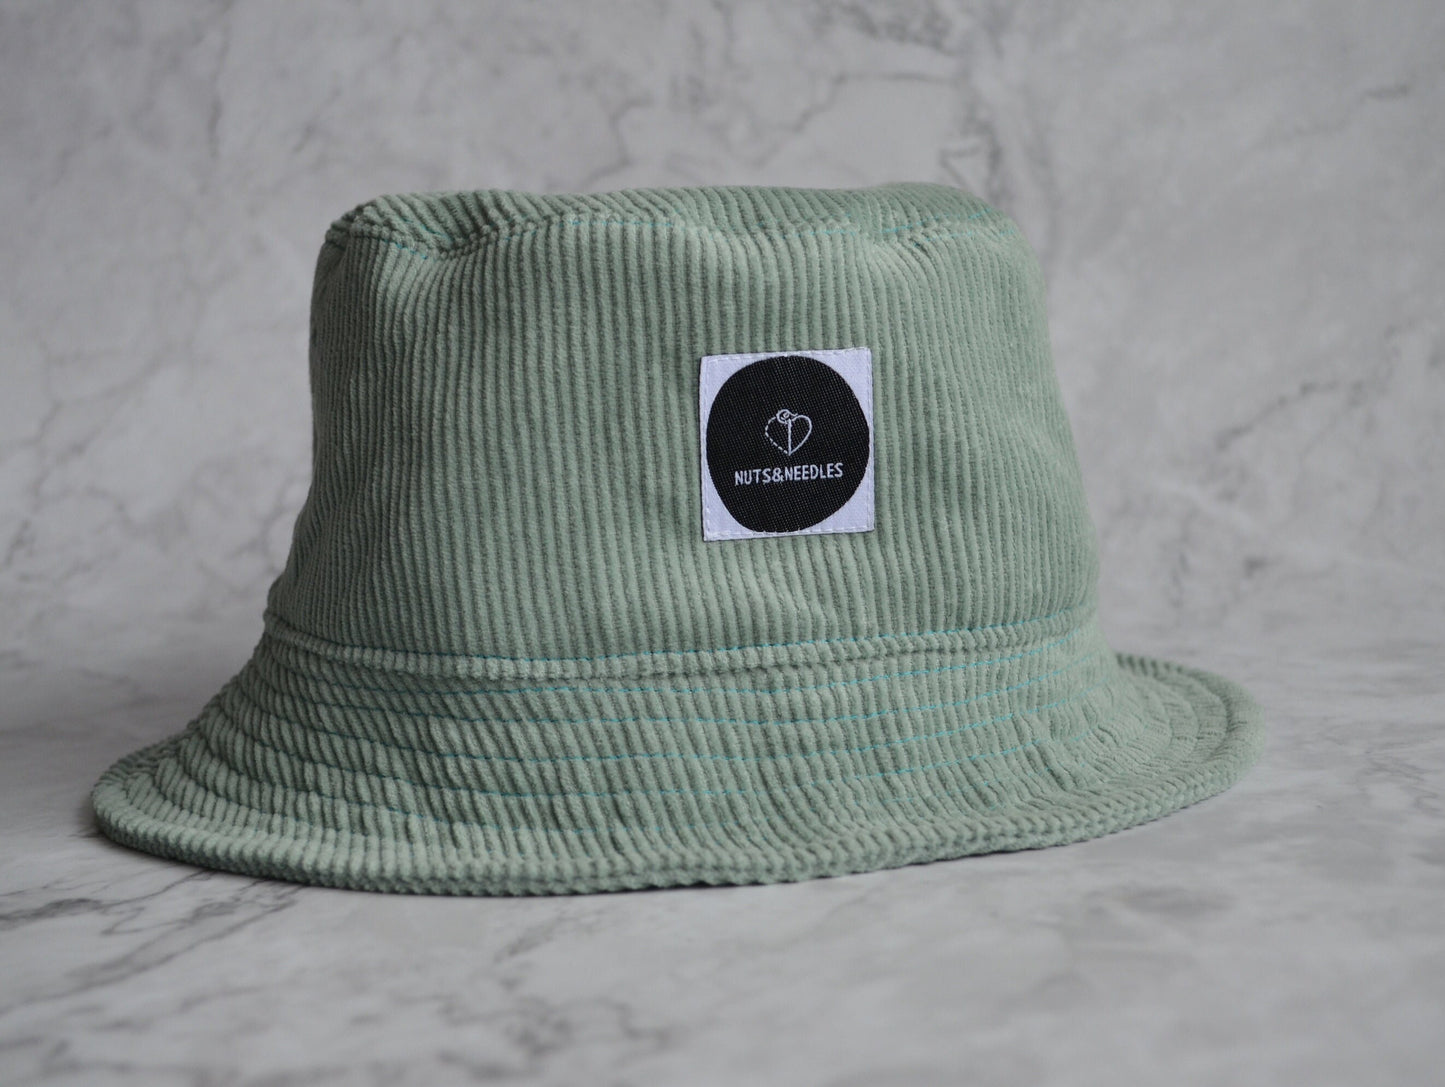 Bucket Hat 'Anxiety Awareness', part of profit donated to Anxiety Charity, Mental Health, handmade gift, self care, unisex urban style, DBT